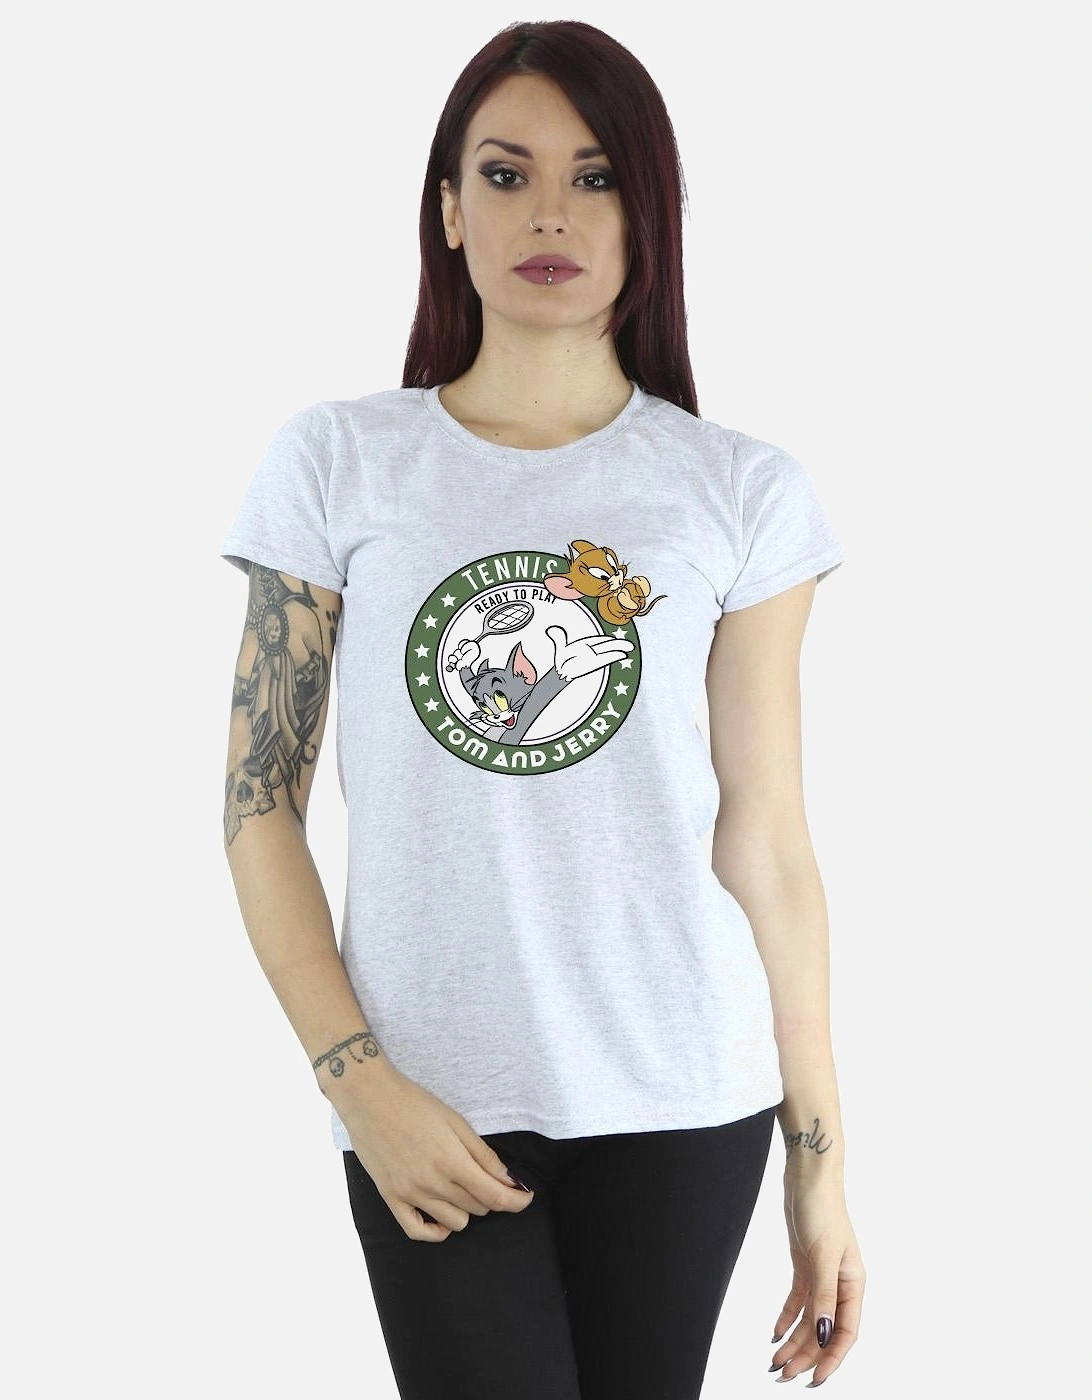 Tom And Jerry Womens/Ladies Tennis Ready To Play Cotton T-Shirt